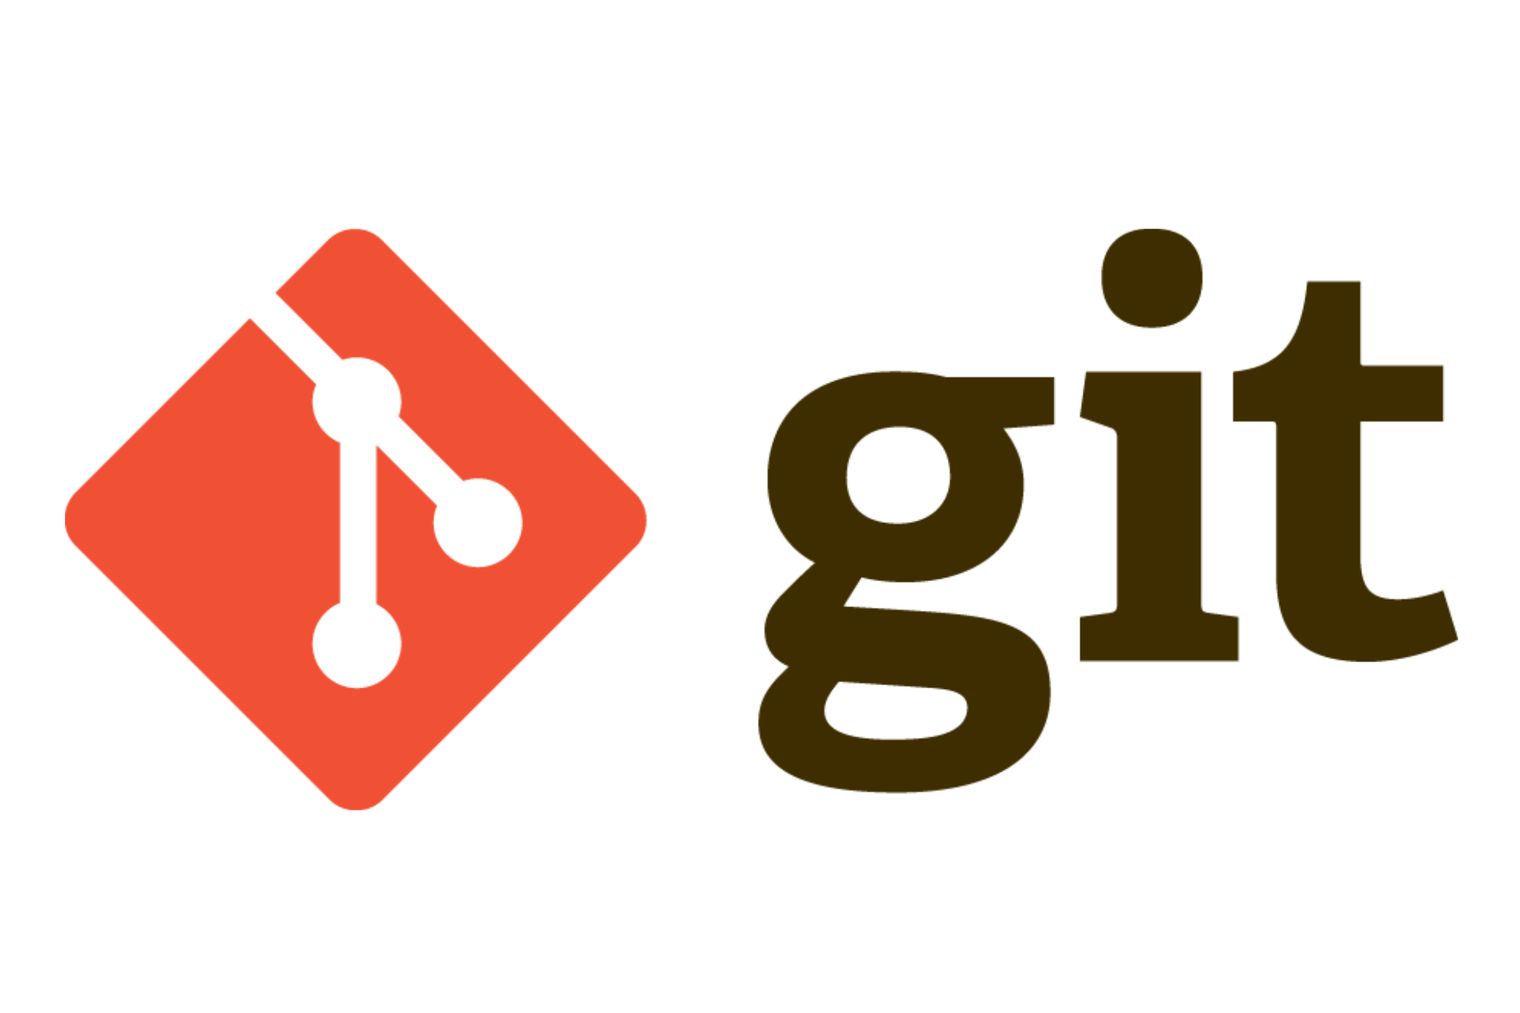 How to remove files from a pushed git commit